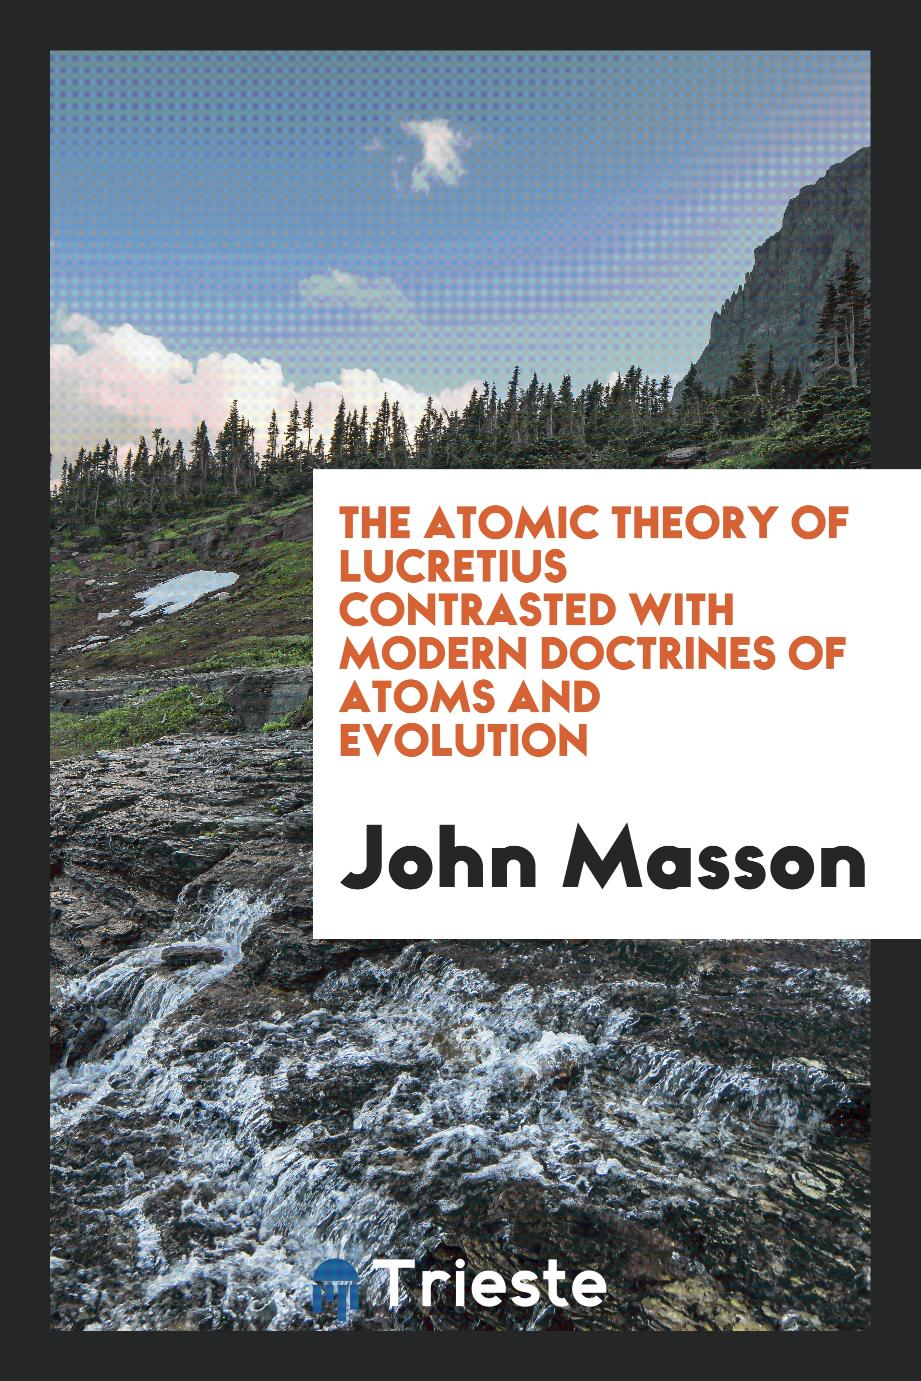 The Atomic Theory of Lucretius Contrasted with Modern Doctrines of Atoms and Evolution